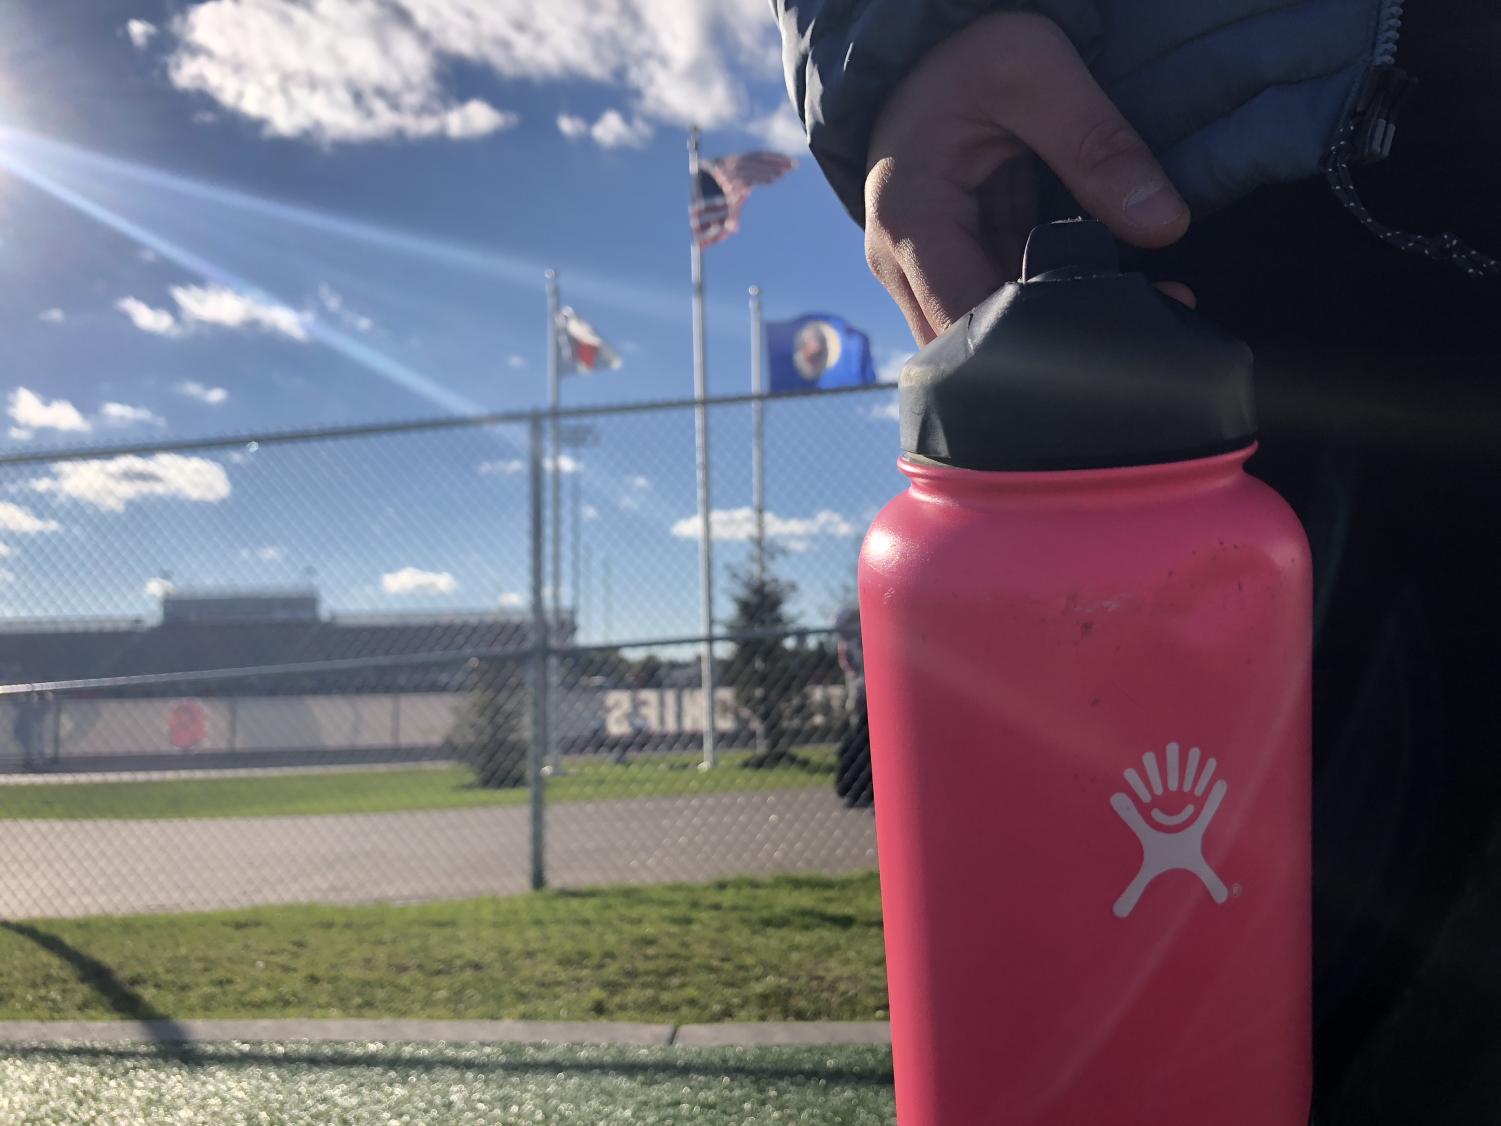 Hydro Flask water bottles introduce new hydration systems - The